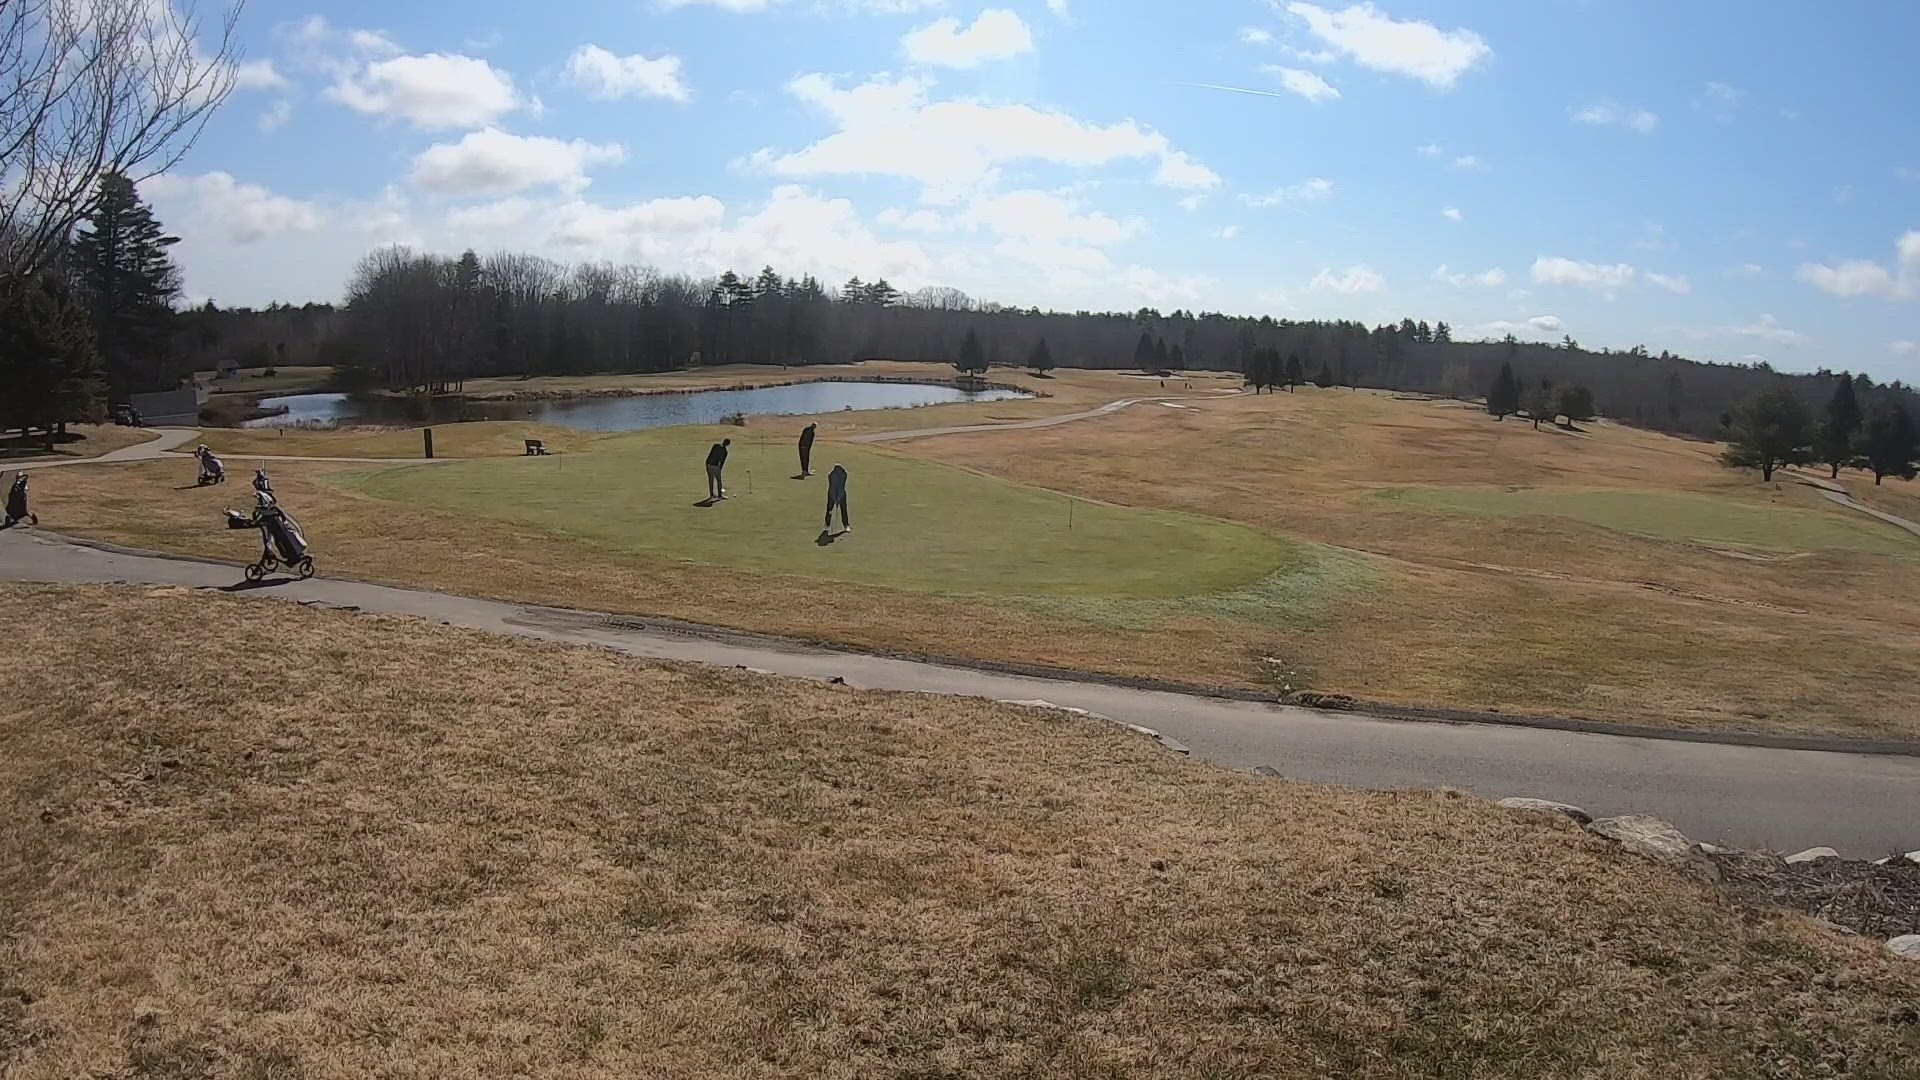 It's only mid-March, but a few golf courses in Maine are already open. Hospitality businesses are optimistic for a successful tourism season after a rough winter.